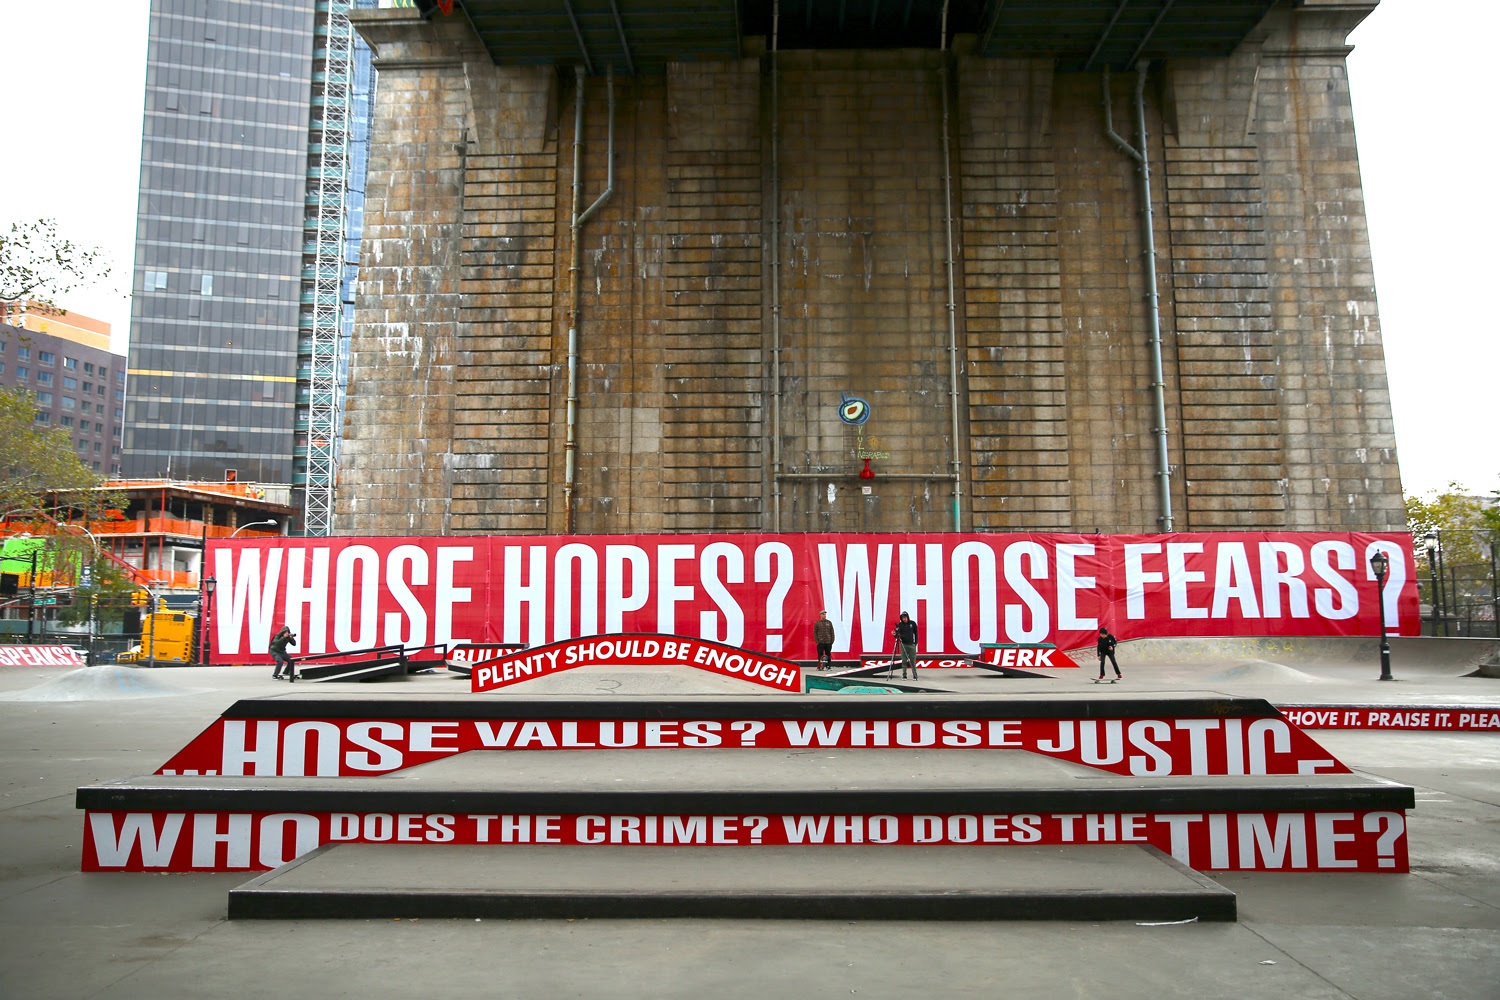 A skate park in an urban location with murals that read "Whose hopes? Whose fears? Whose justice?" among other questions. The text is written in white on red background.